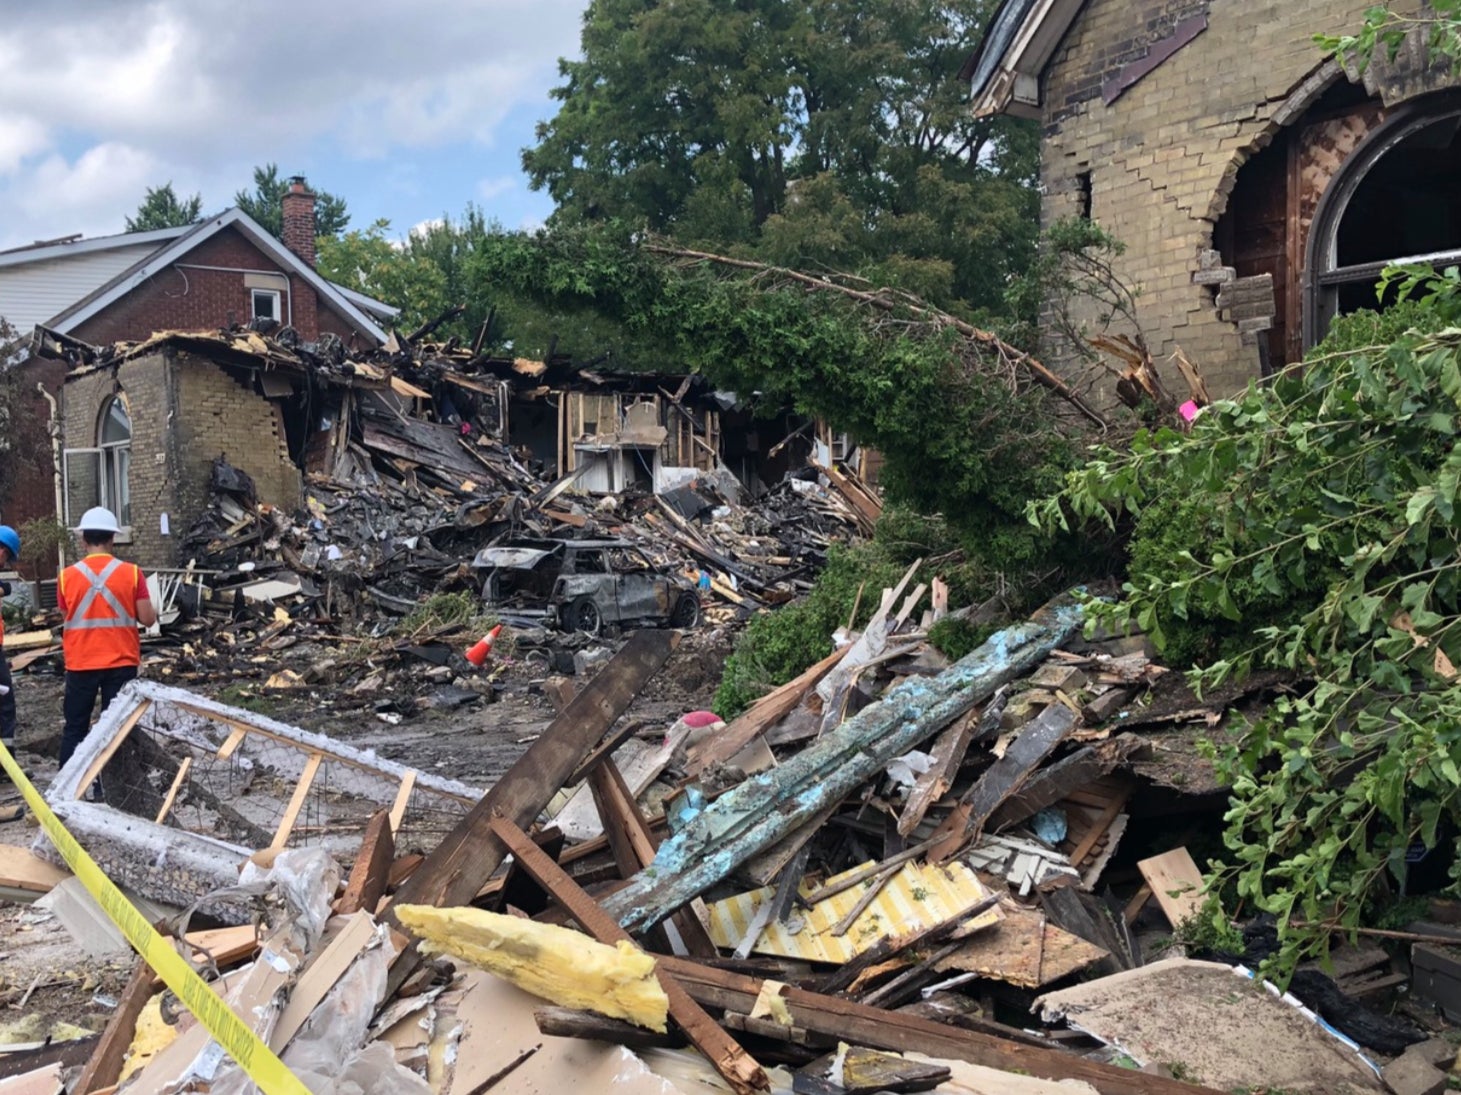 Wreckage is seen in London, Ontario, after Danielle Leis crashed her car and caused an explosion in August 2019